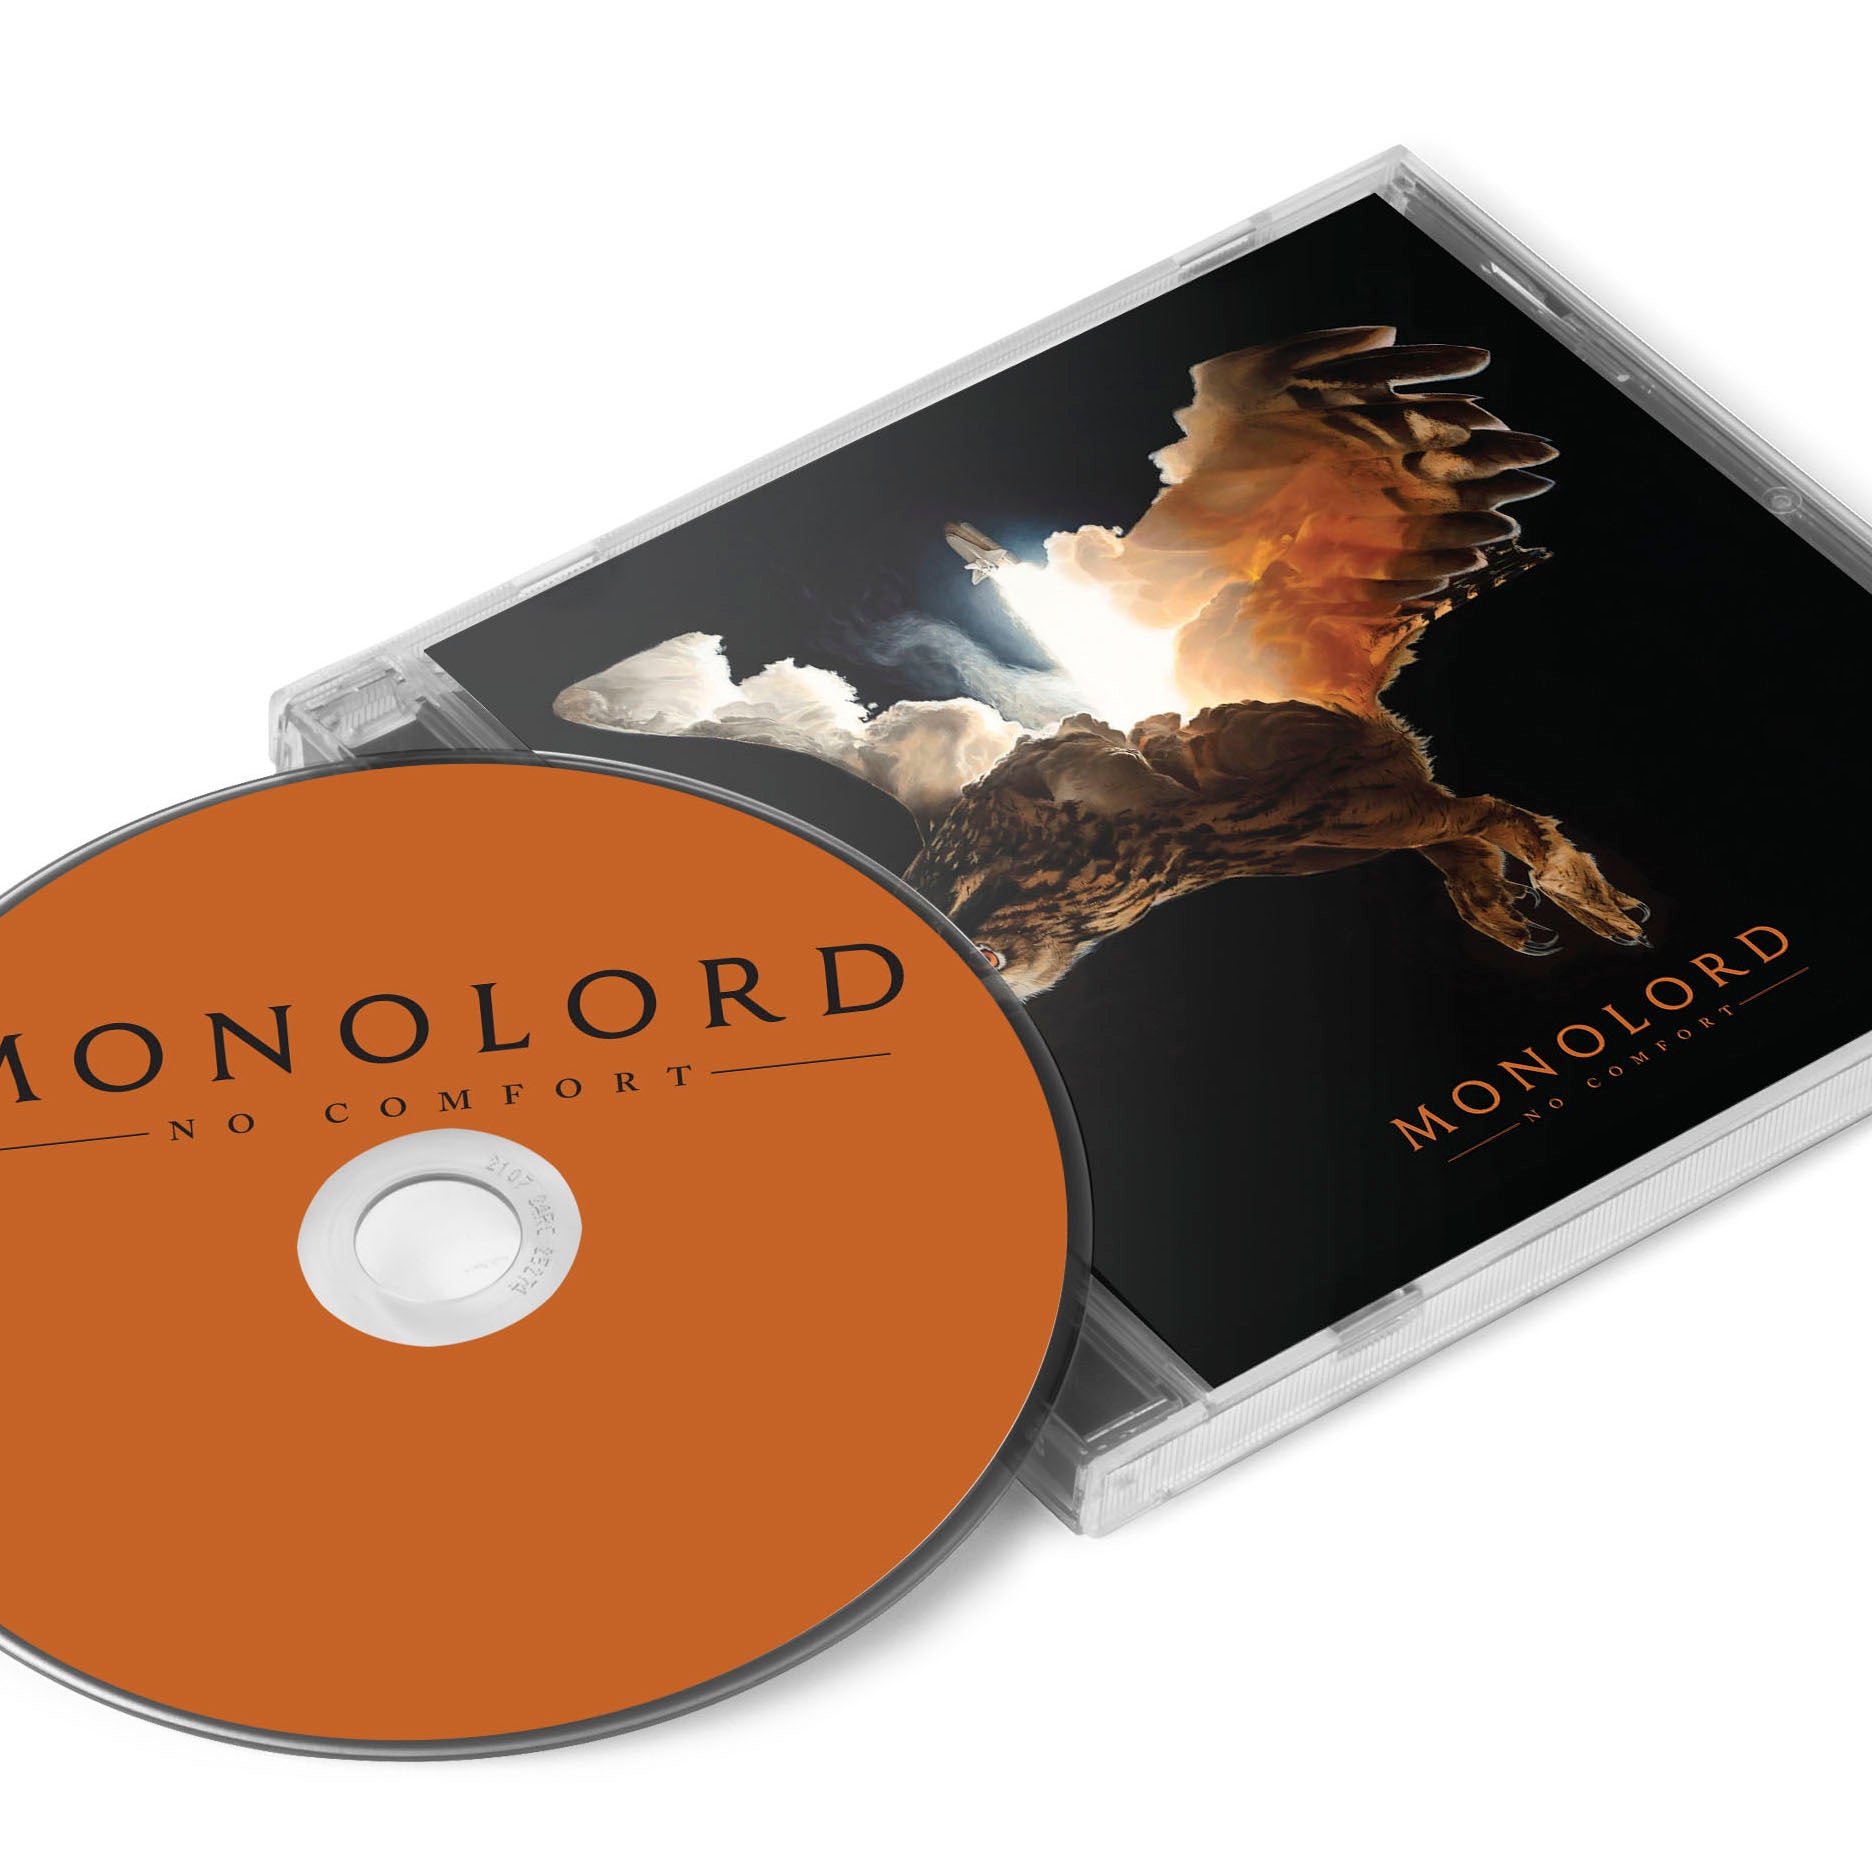 Monolord "No Comfort" CD